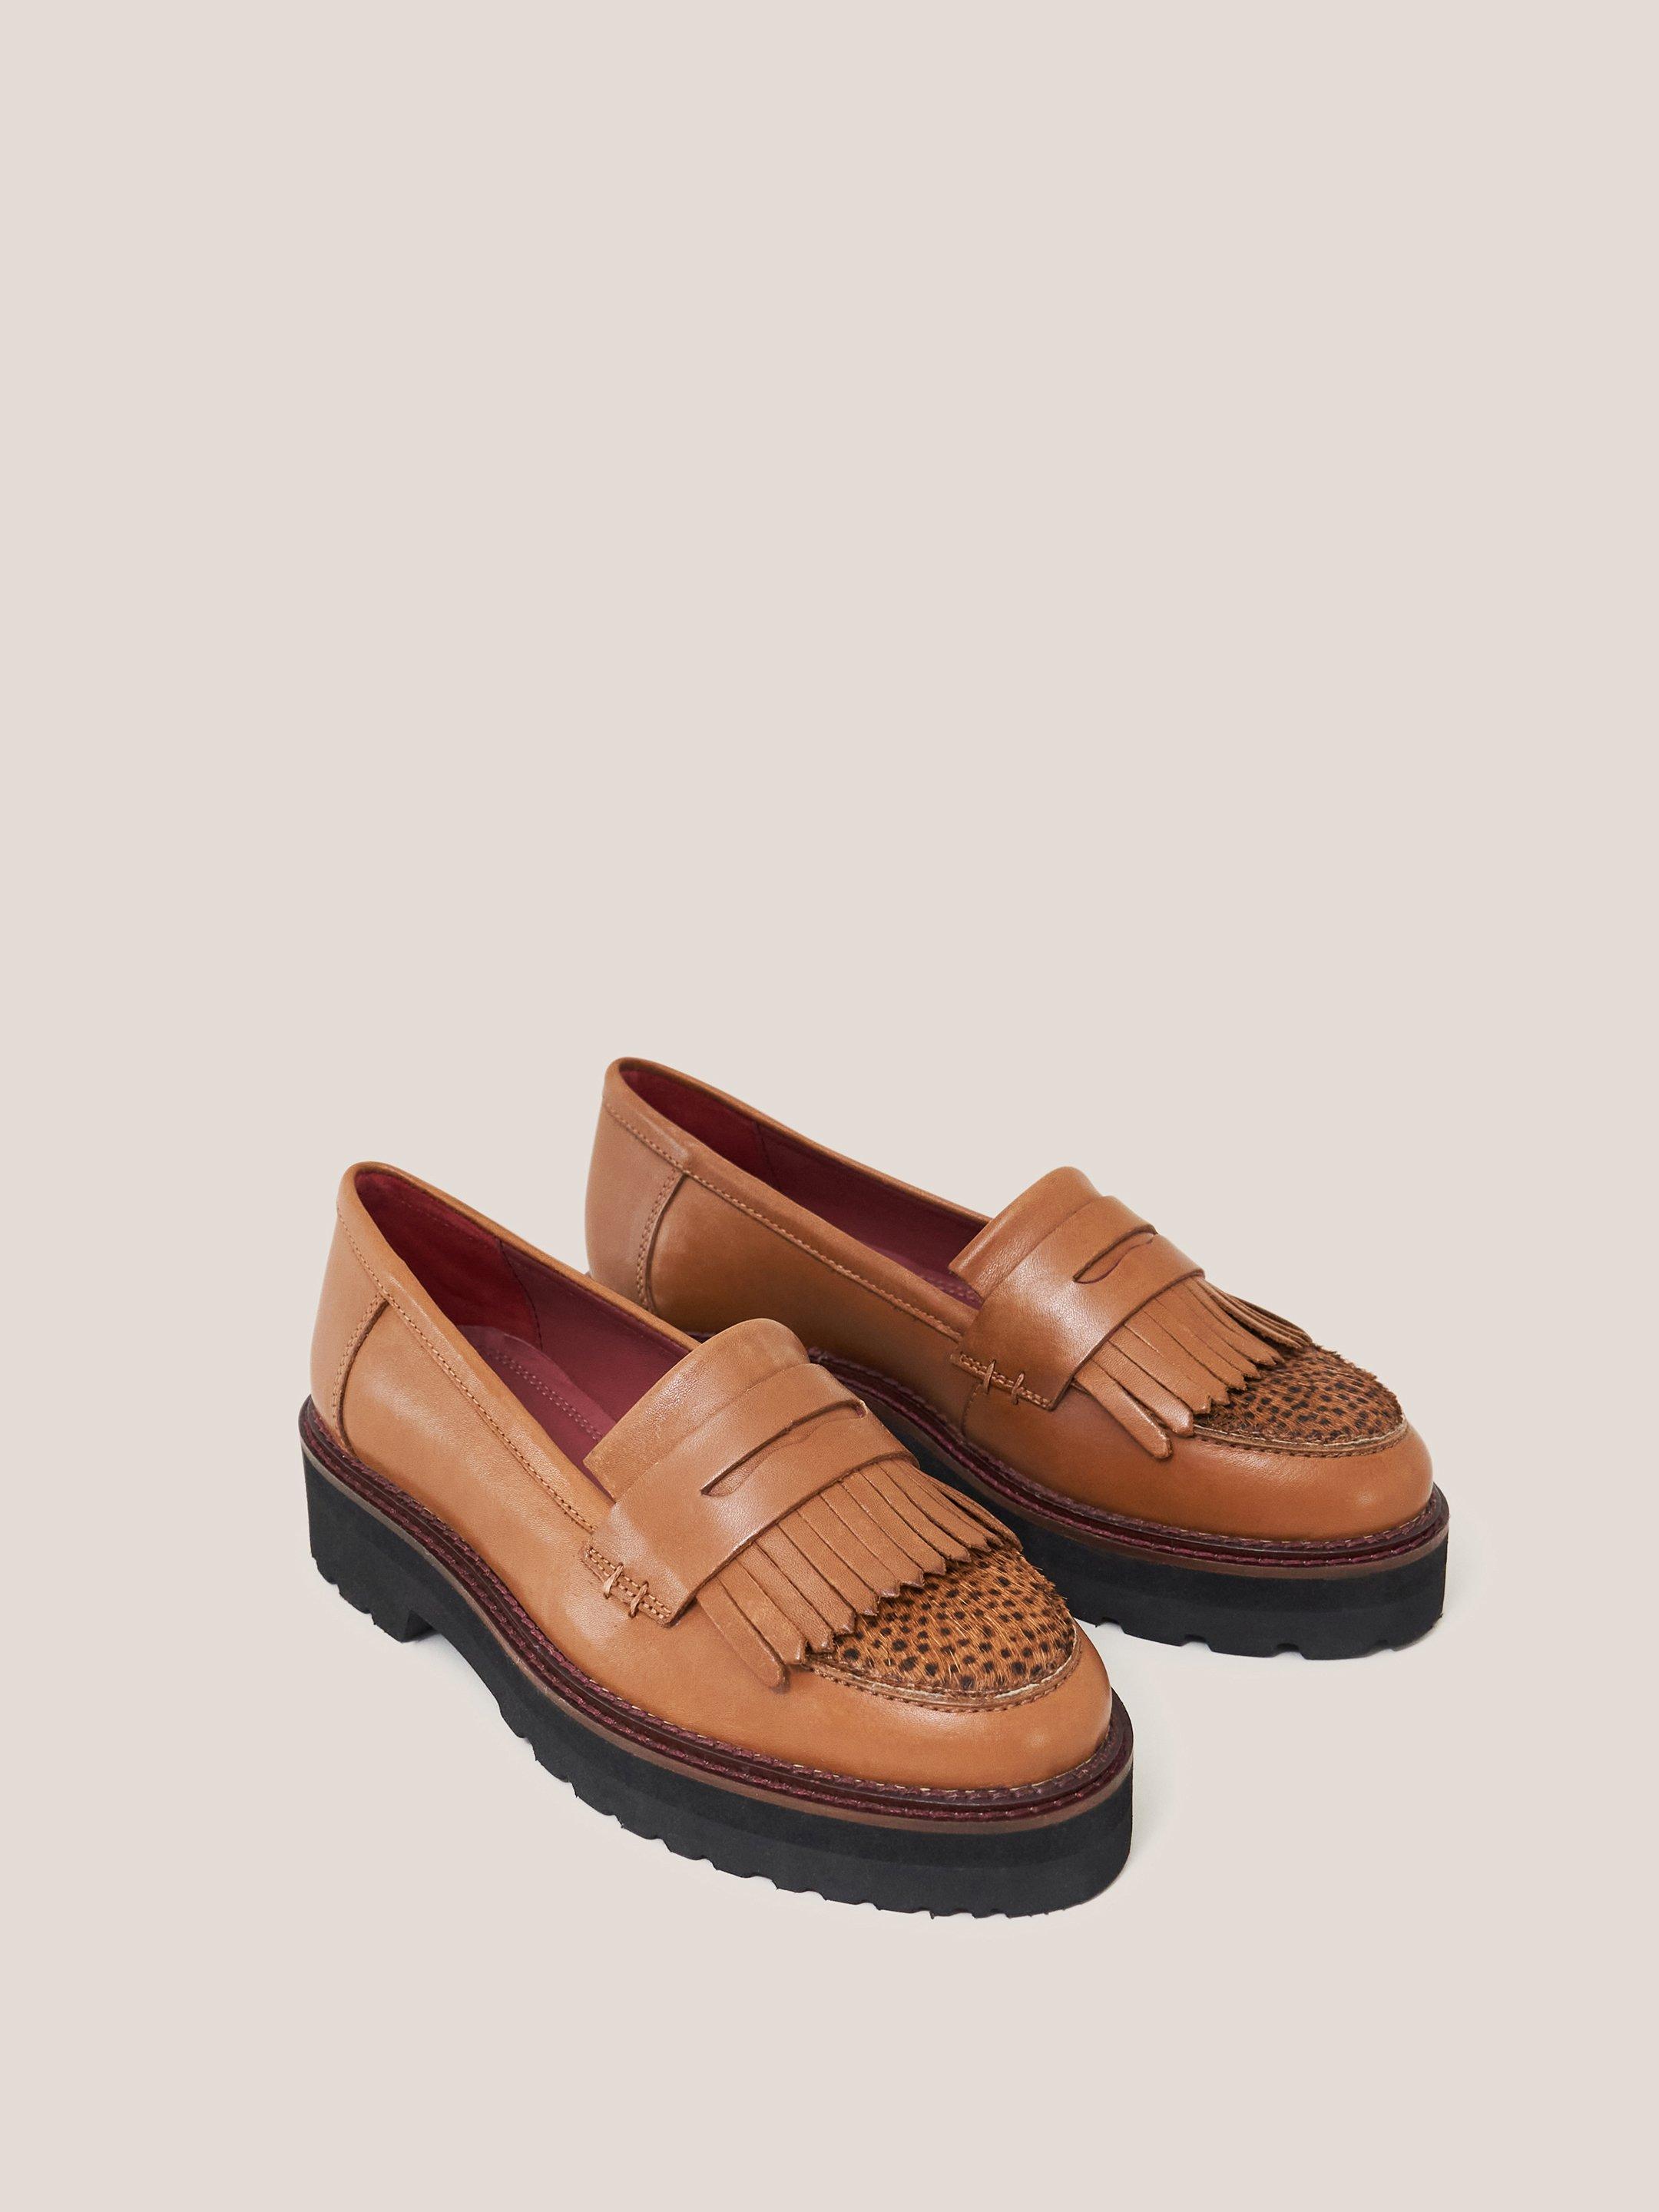 Elva Chunky Leather Loafer in TAN MULTI - FLAT FRONT